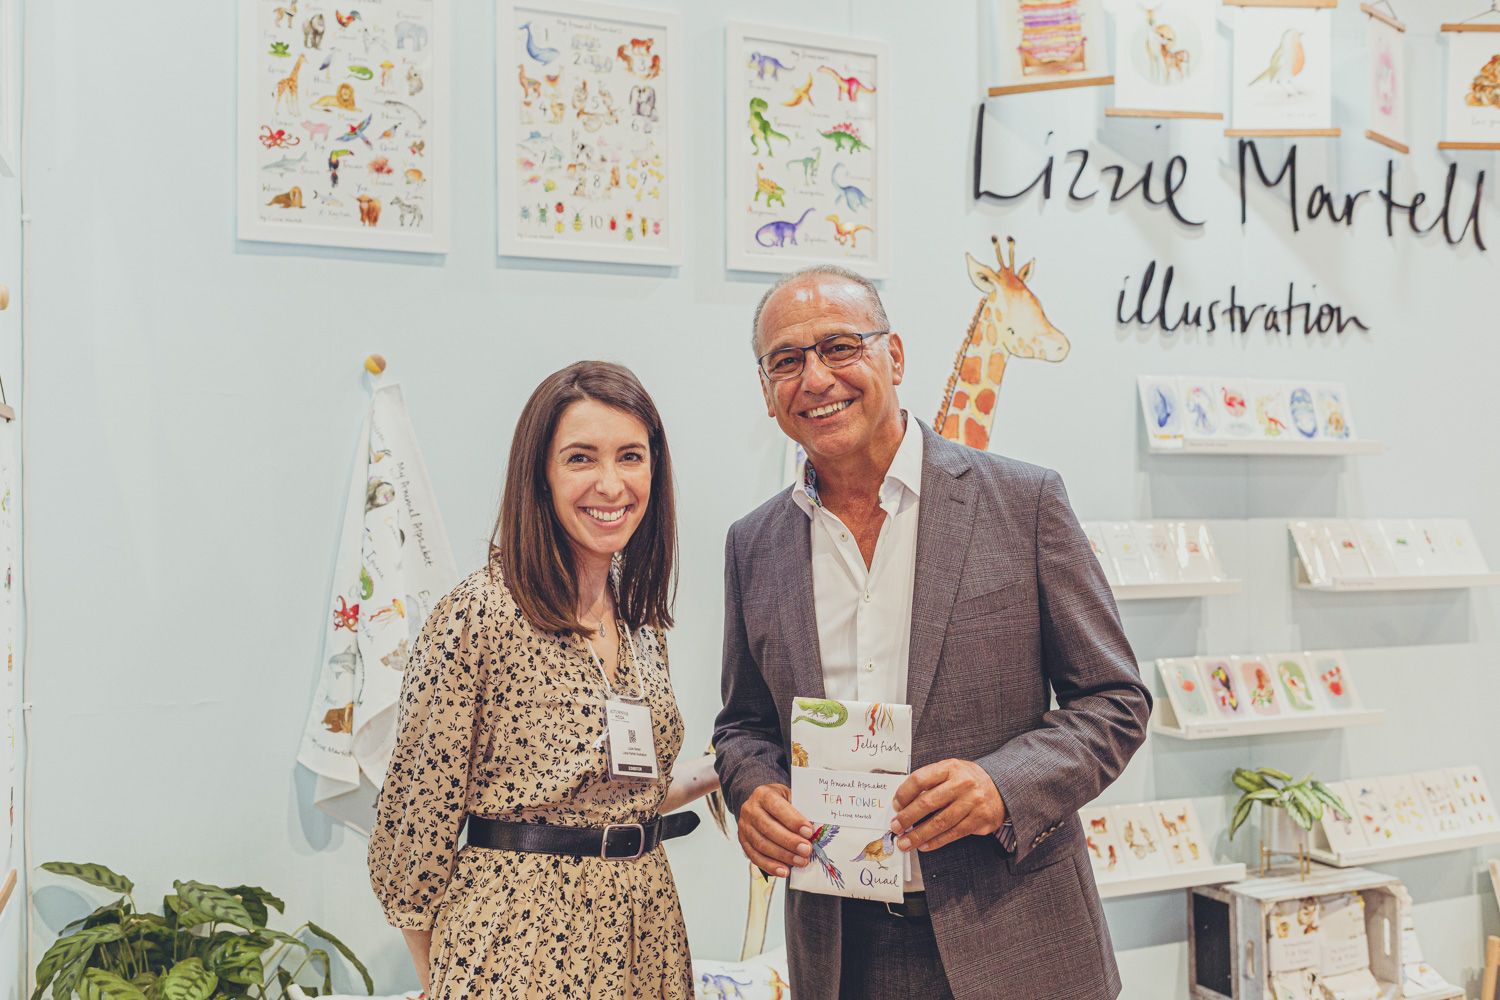 Theo Paphitis and Lizzie Martell at SBS Autumn Fair